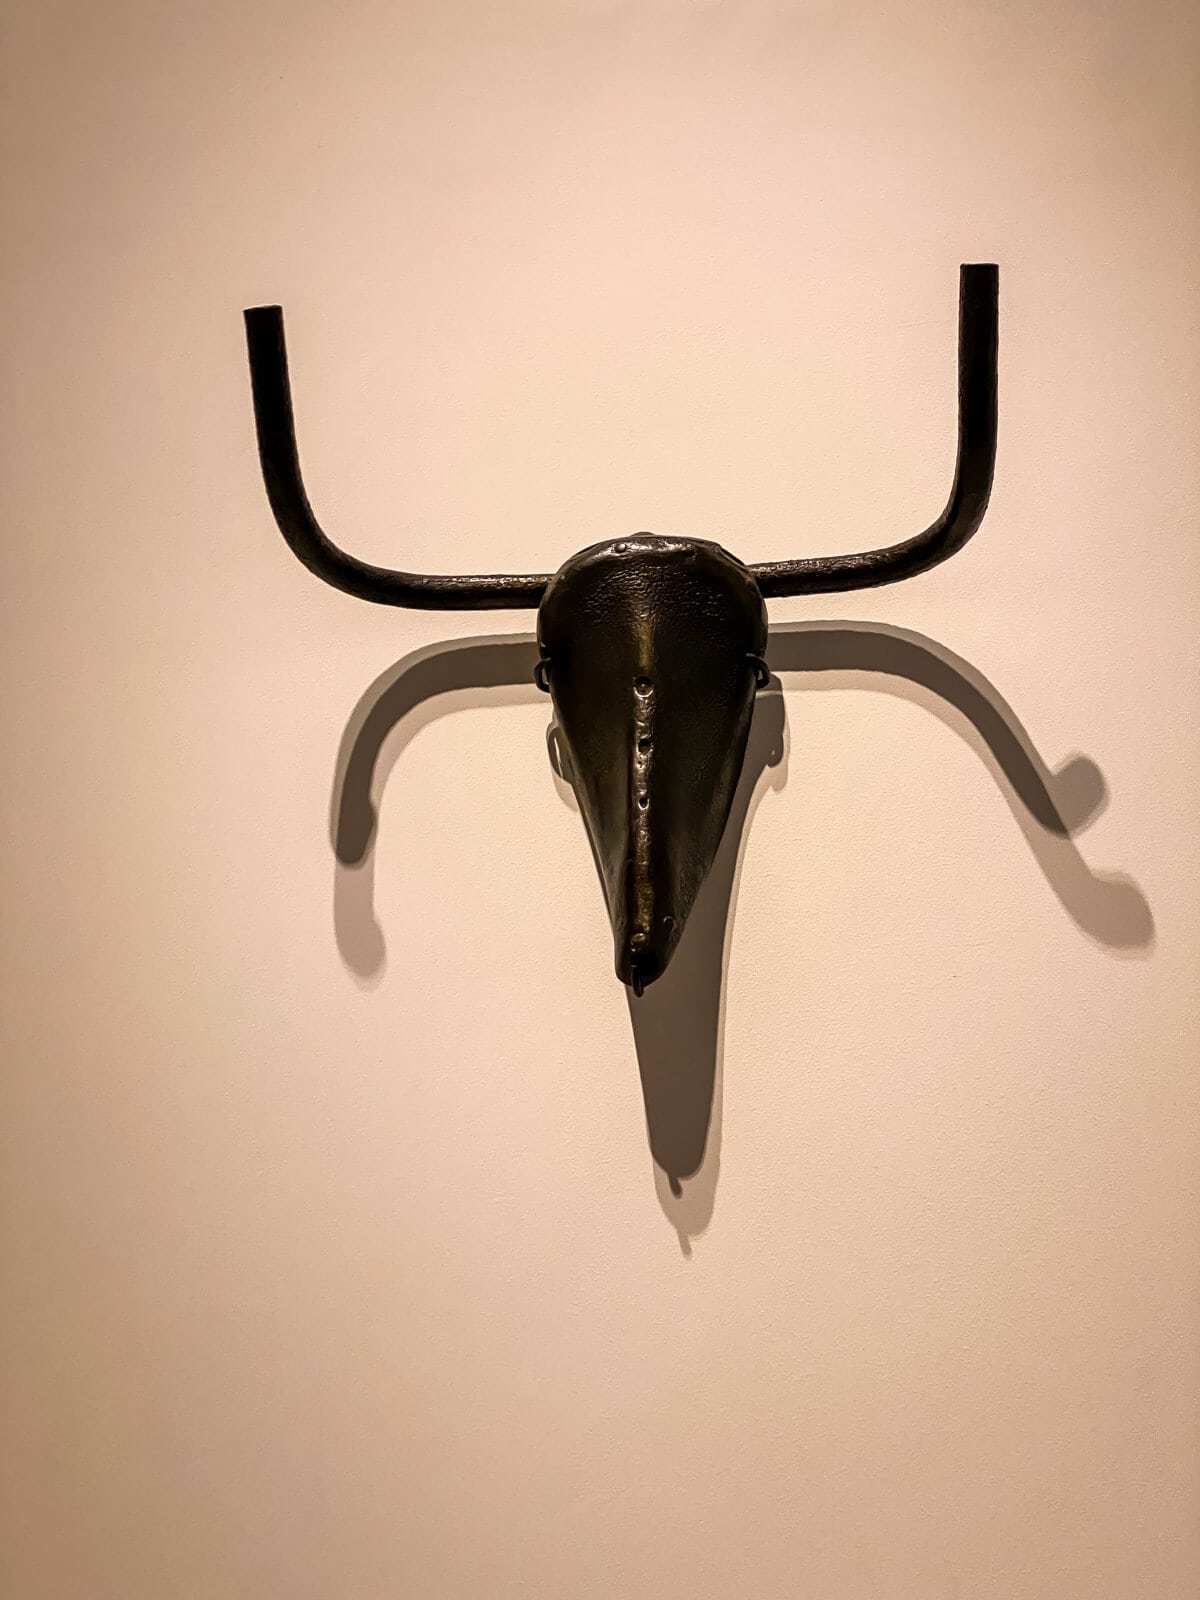 Picasso Sculpture made from a bicycle seat